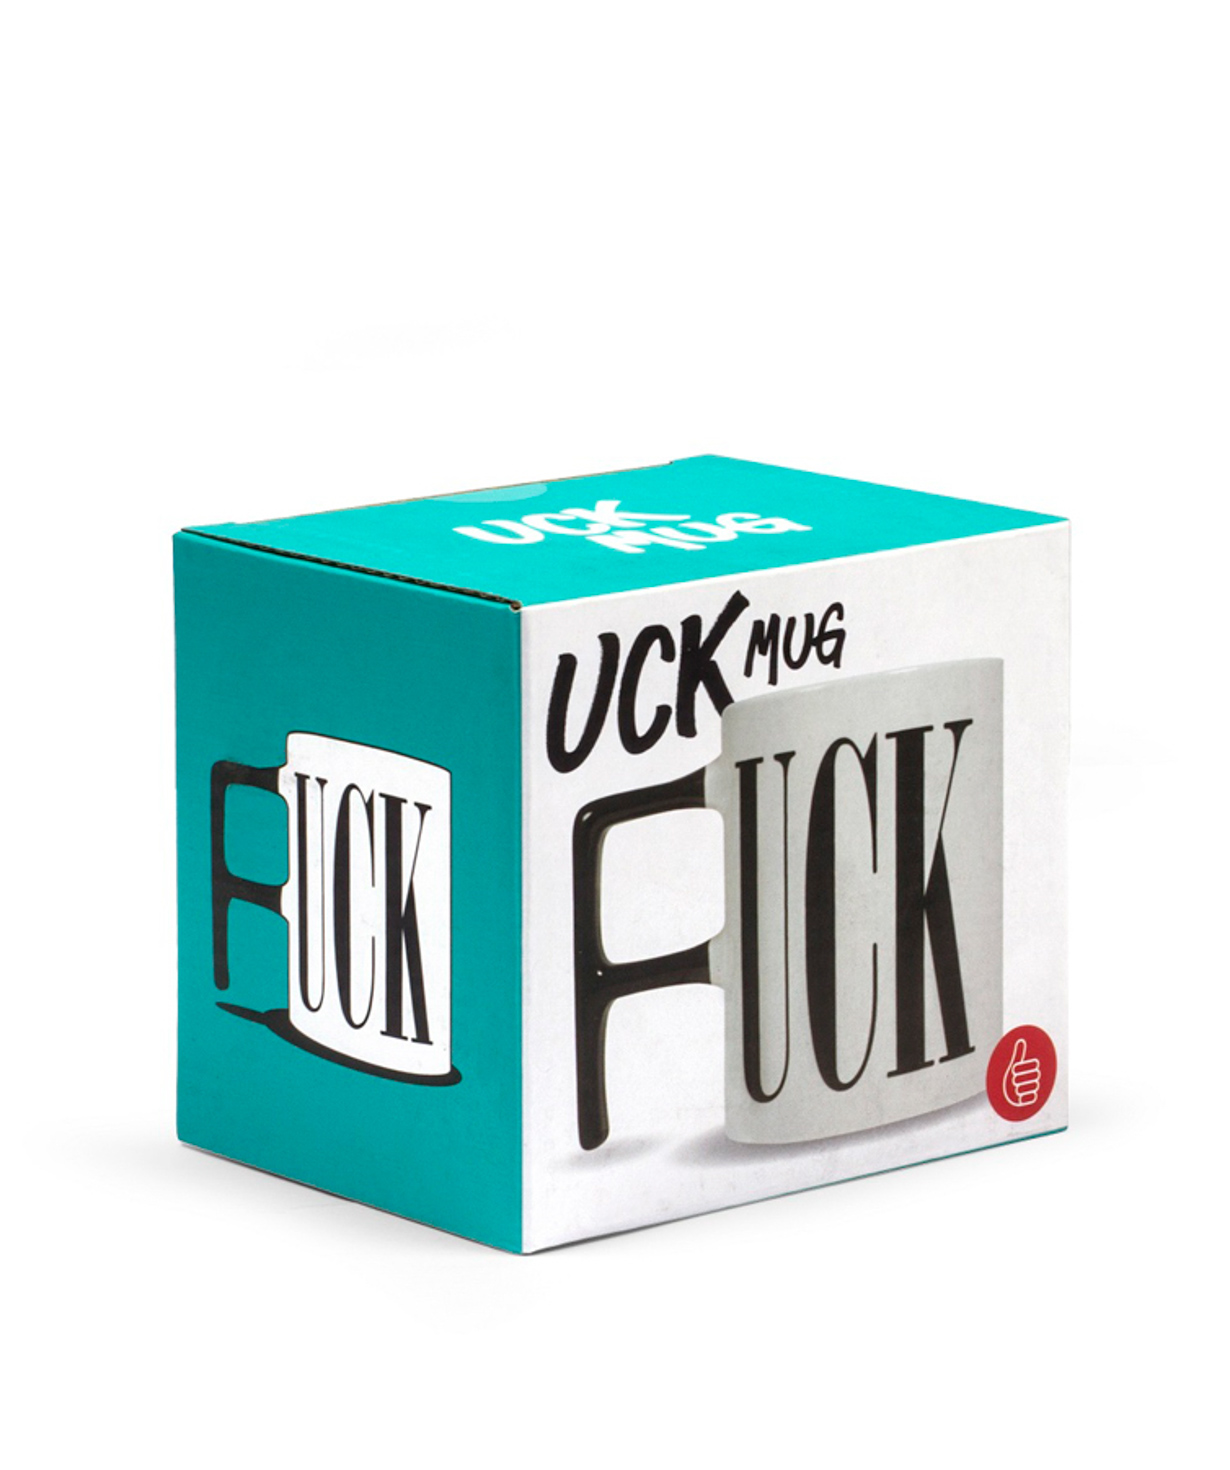 Cup `Creative Gifts` F*ck